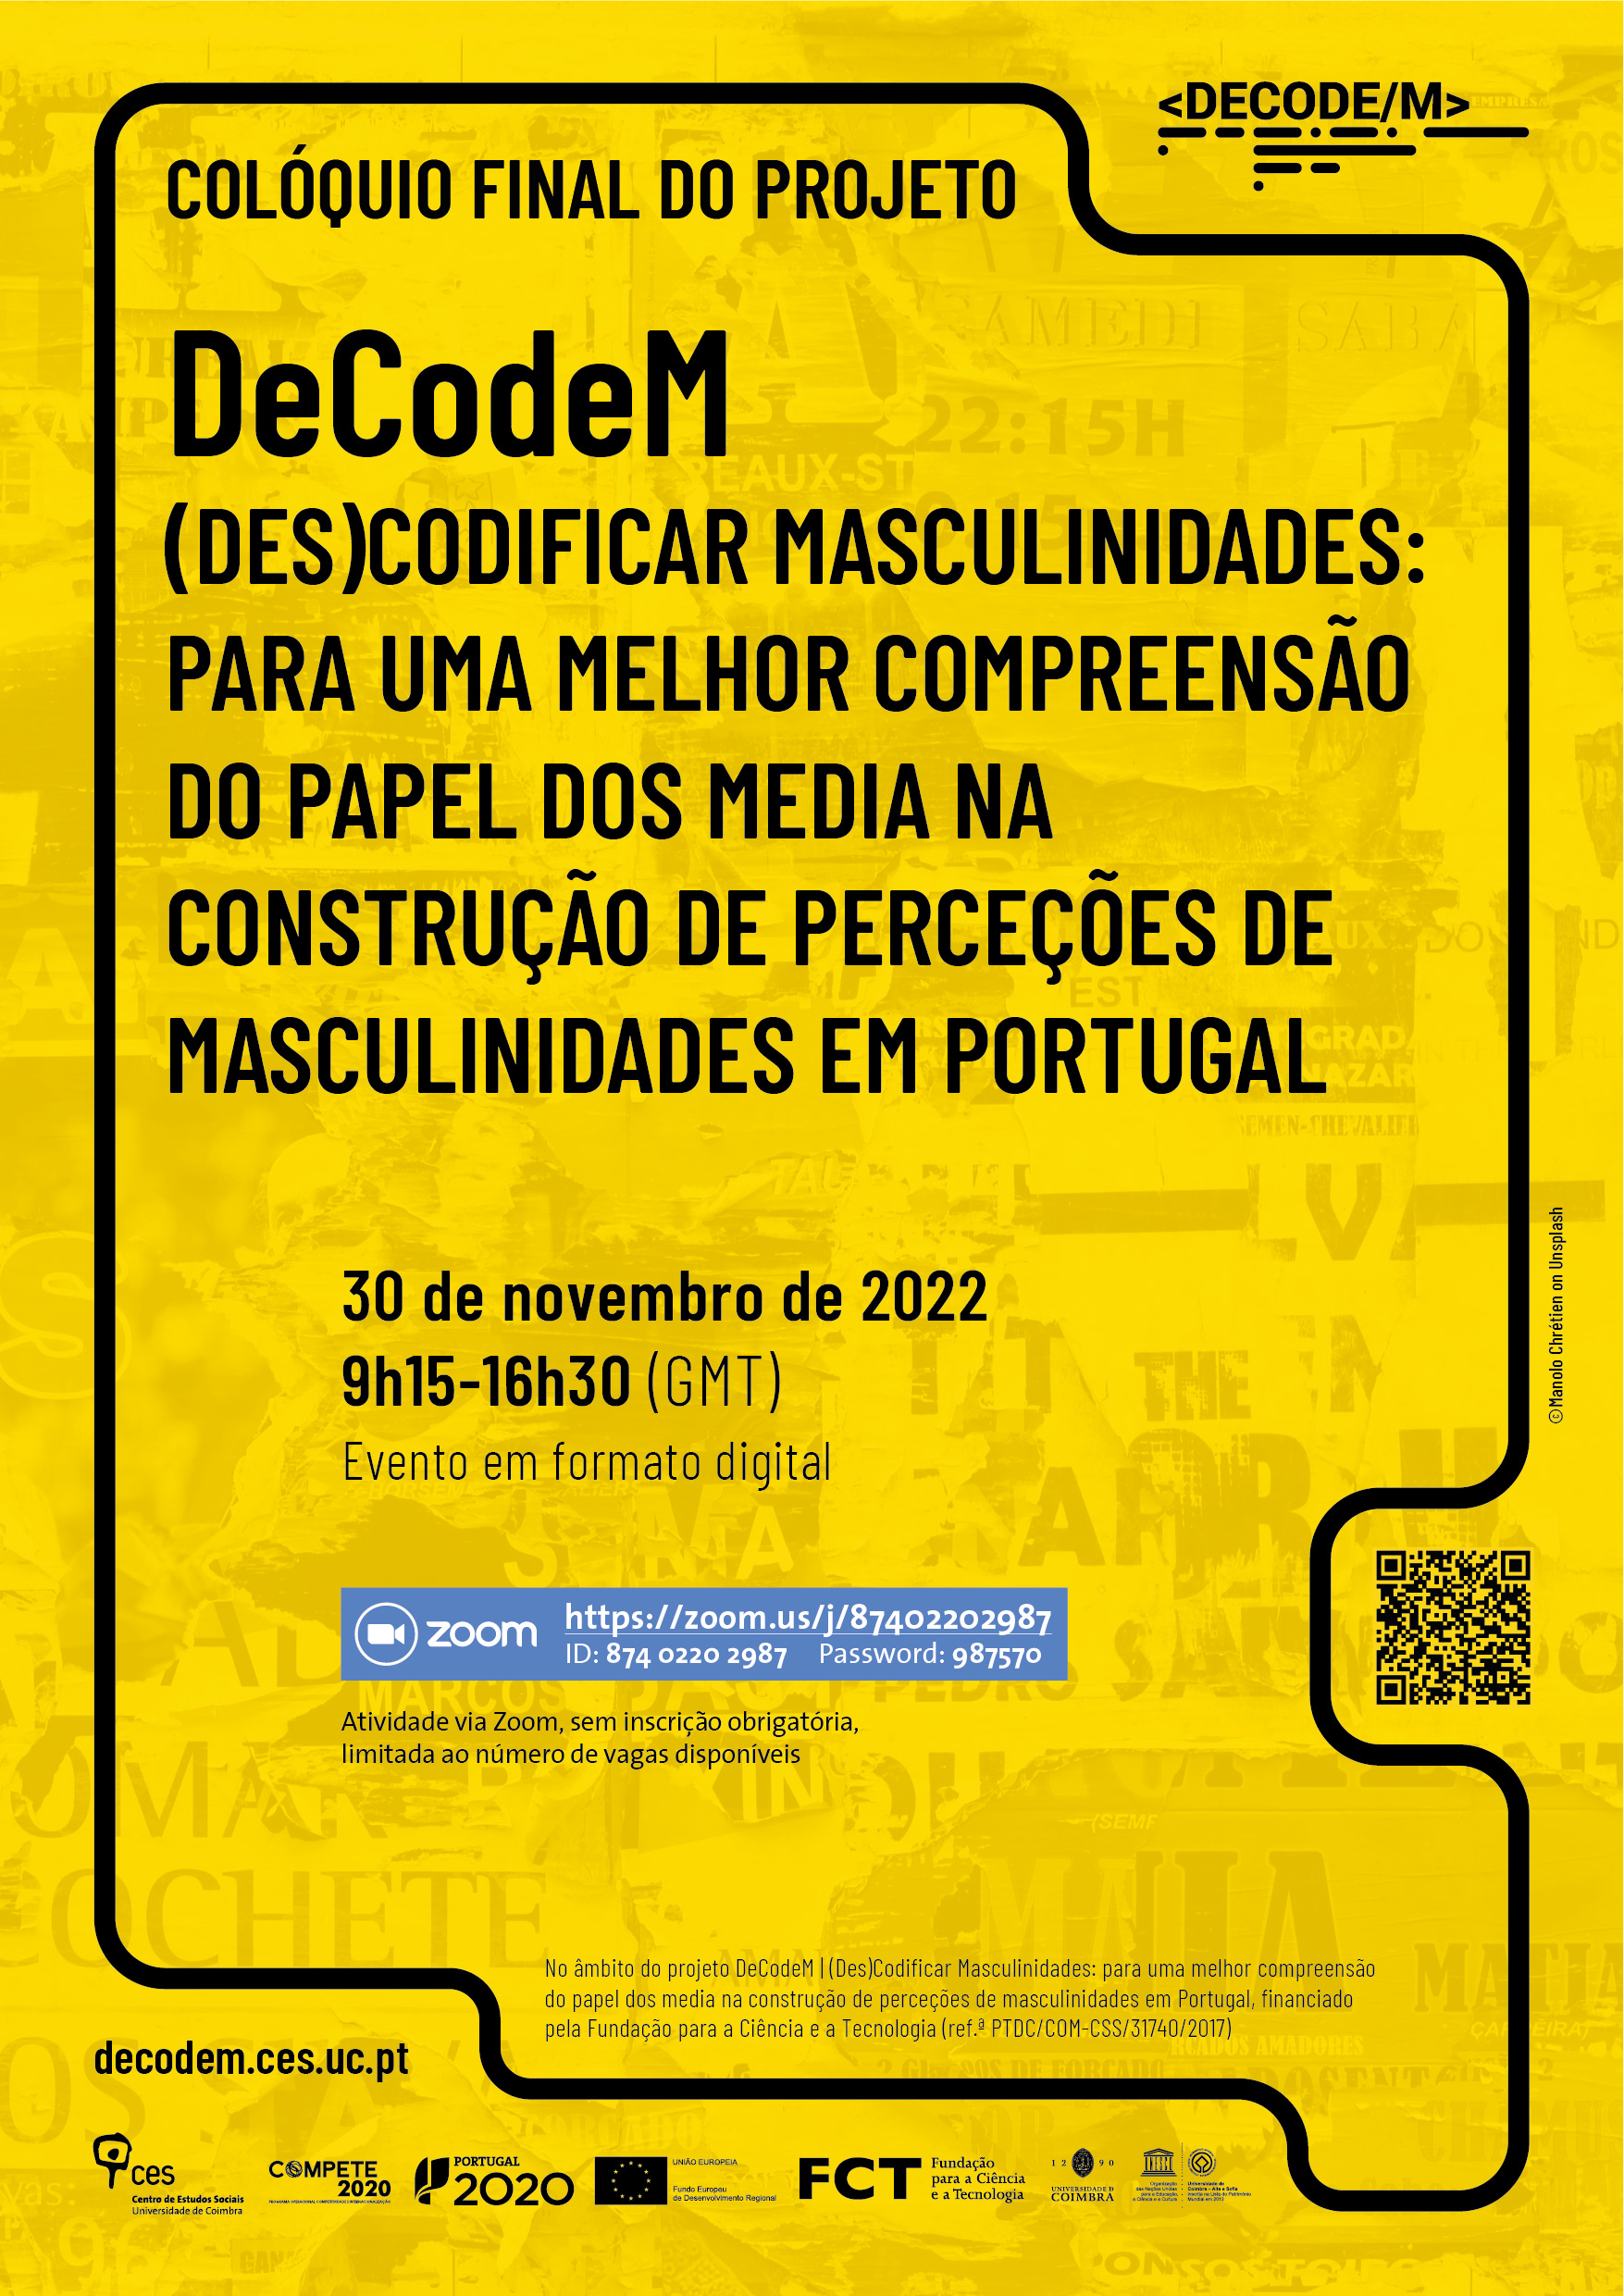 DeCodeM | (De)Coding Masculinities: Towards an enhanced understanding of media’s role in shaping perceptions of masculinities in Portugal<span id="edit_40996"><script>$(function() { $('#edit_40996').load( "/myces/user/editobj.php?tipo=evento&id=40996" ); });</script></span>